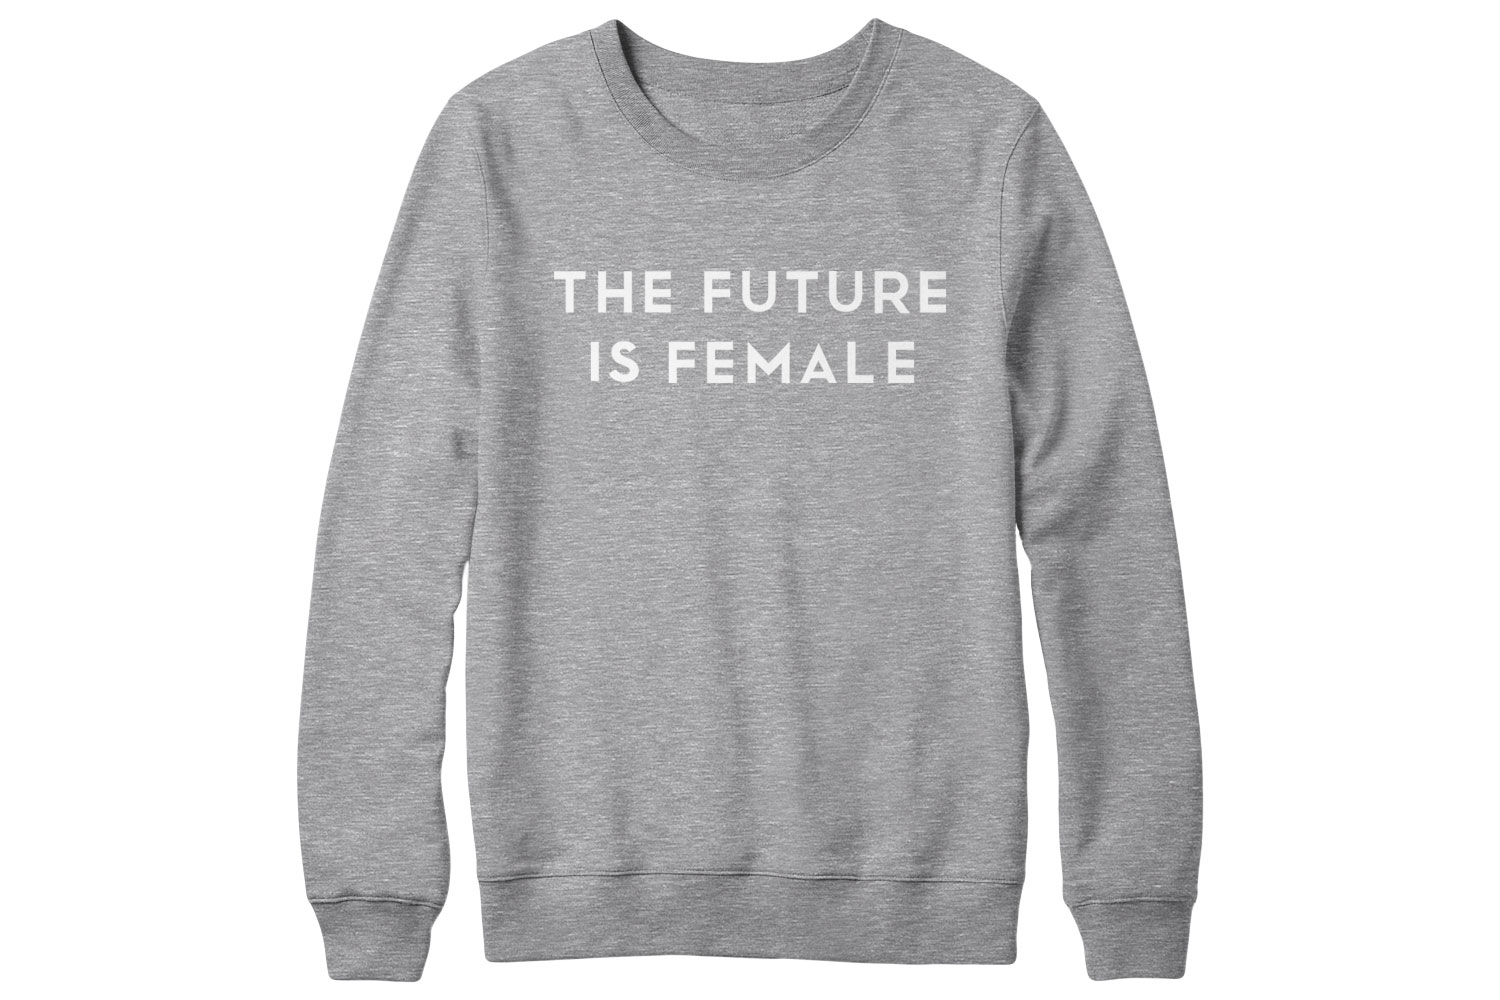 Cara Delevingne Releases ‘The Future Is Female’ Sweatshirts For Charity